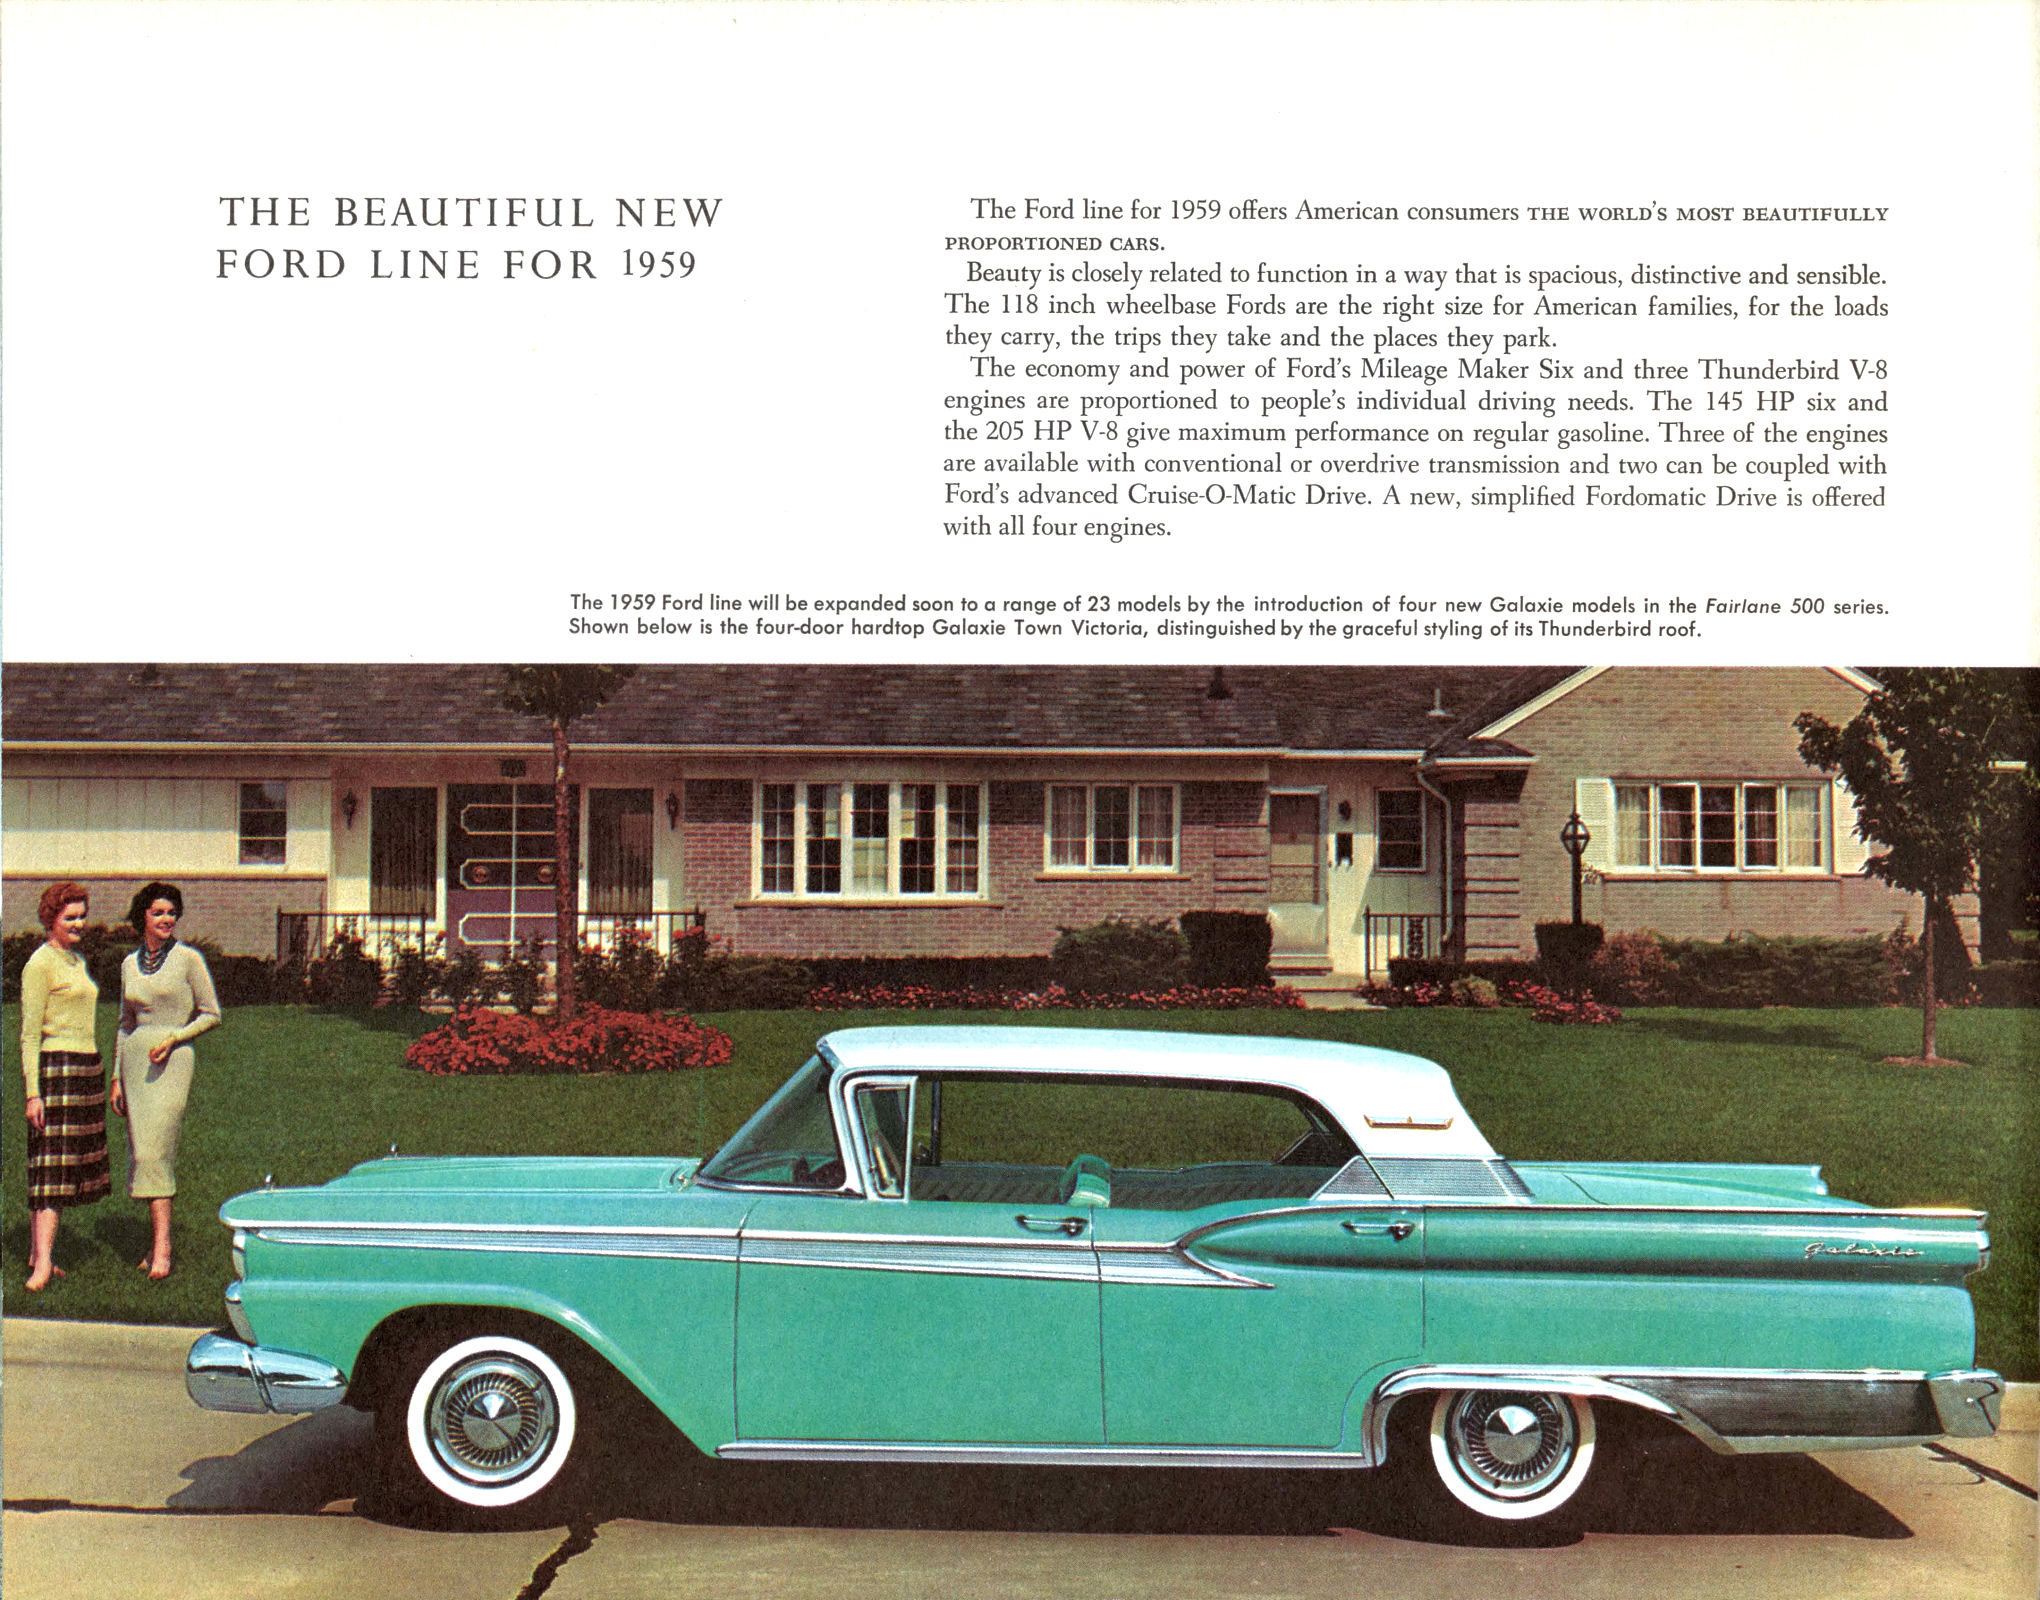 1959 Ford Family of Fine Cars-04